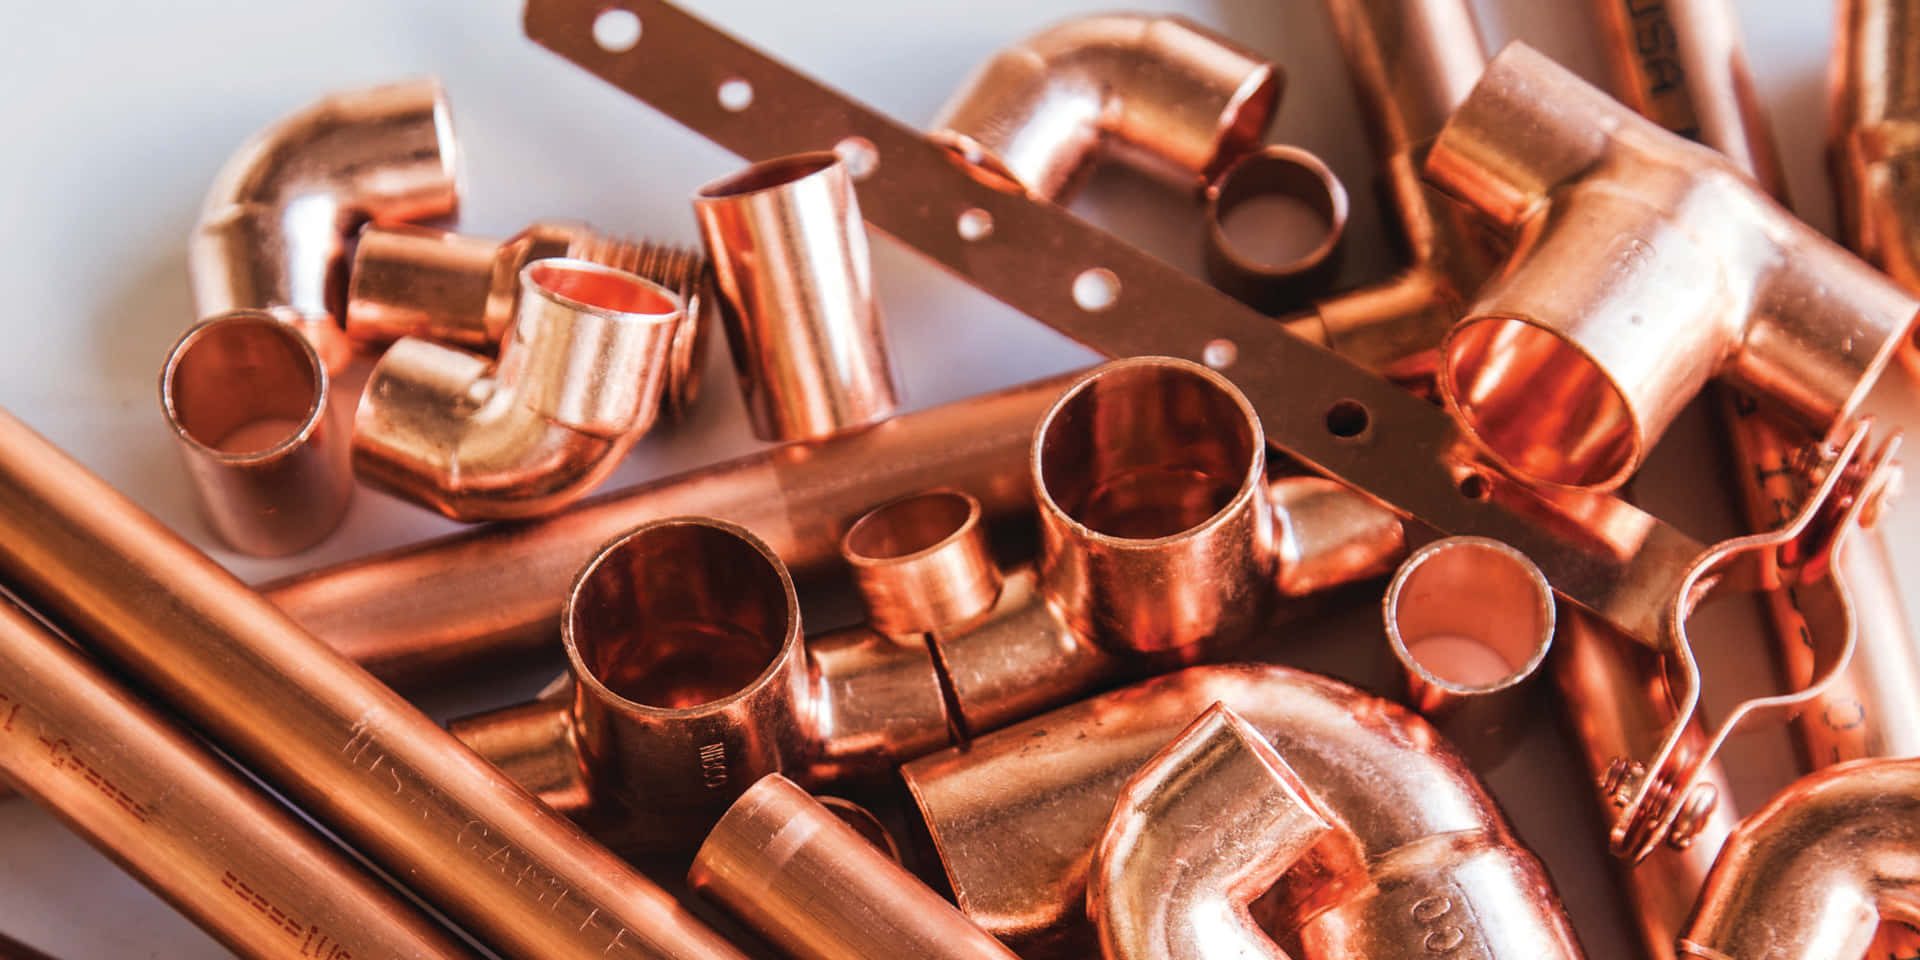 Copper Pipesand Fittings Collection Background